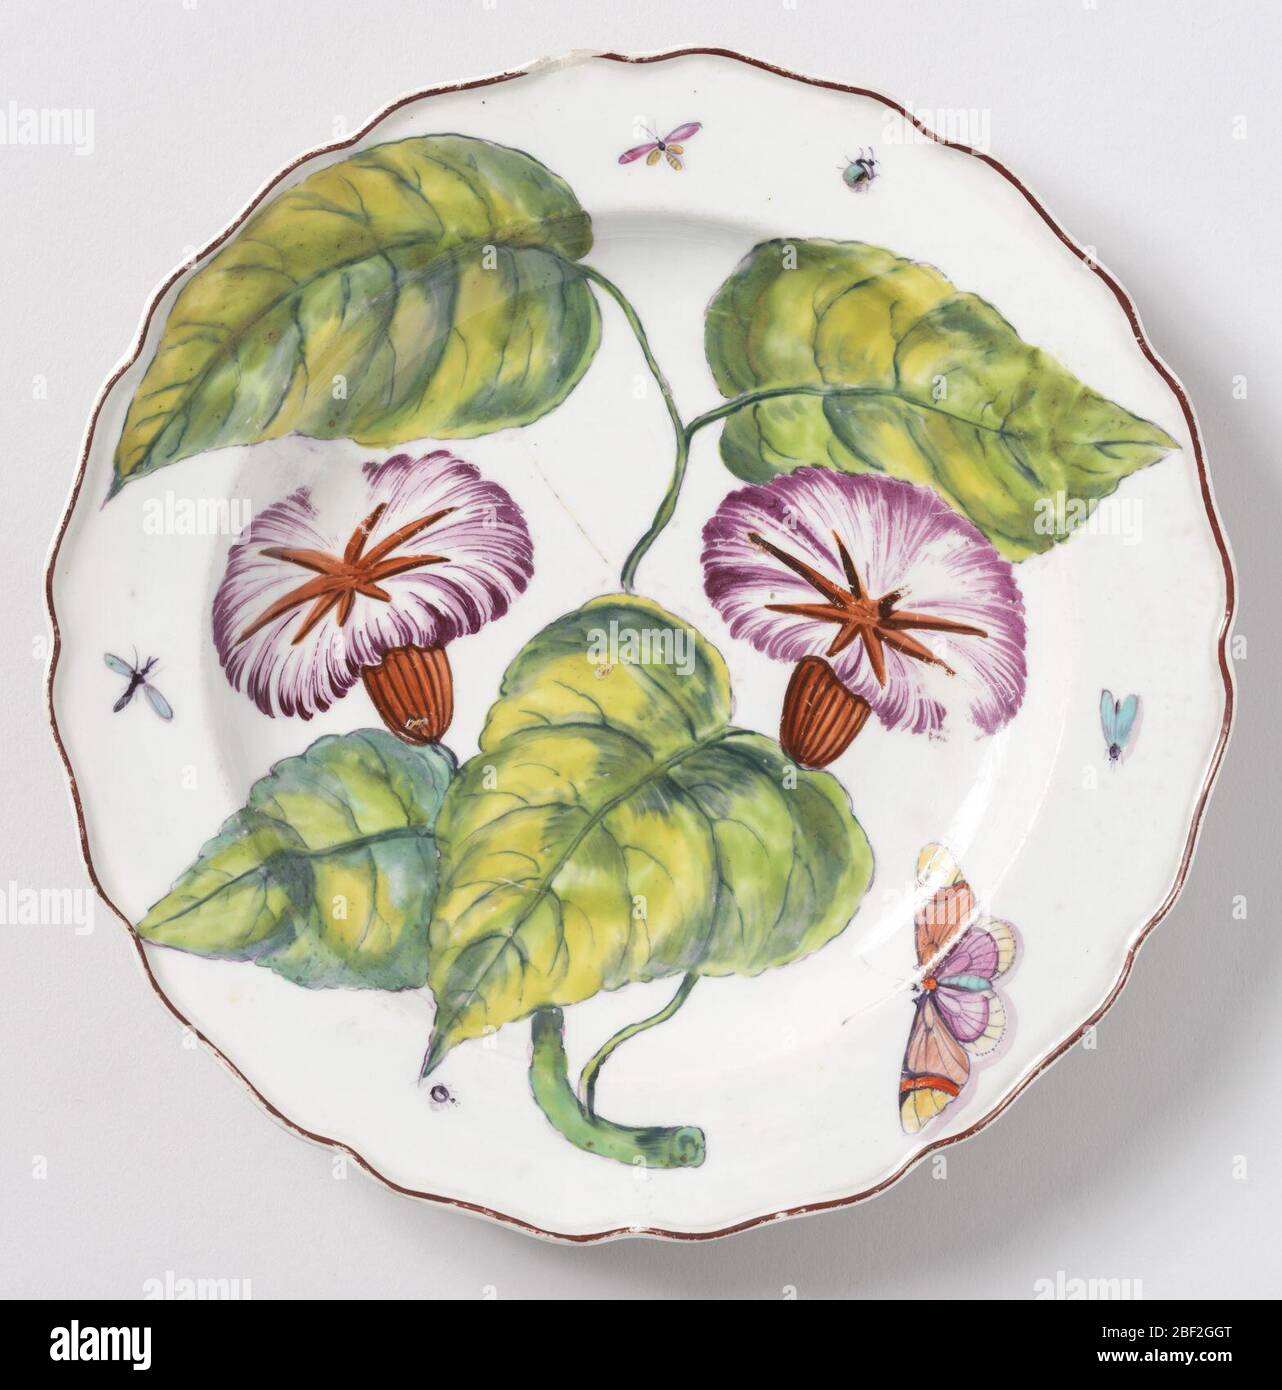 Plate. A plate with a wavy, brown-edged rim, painted with a large branch of convolvulus/bindweed (Ipomoea purpurea) and various insects. Stock Photo